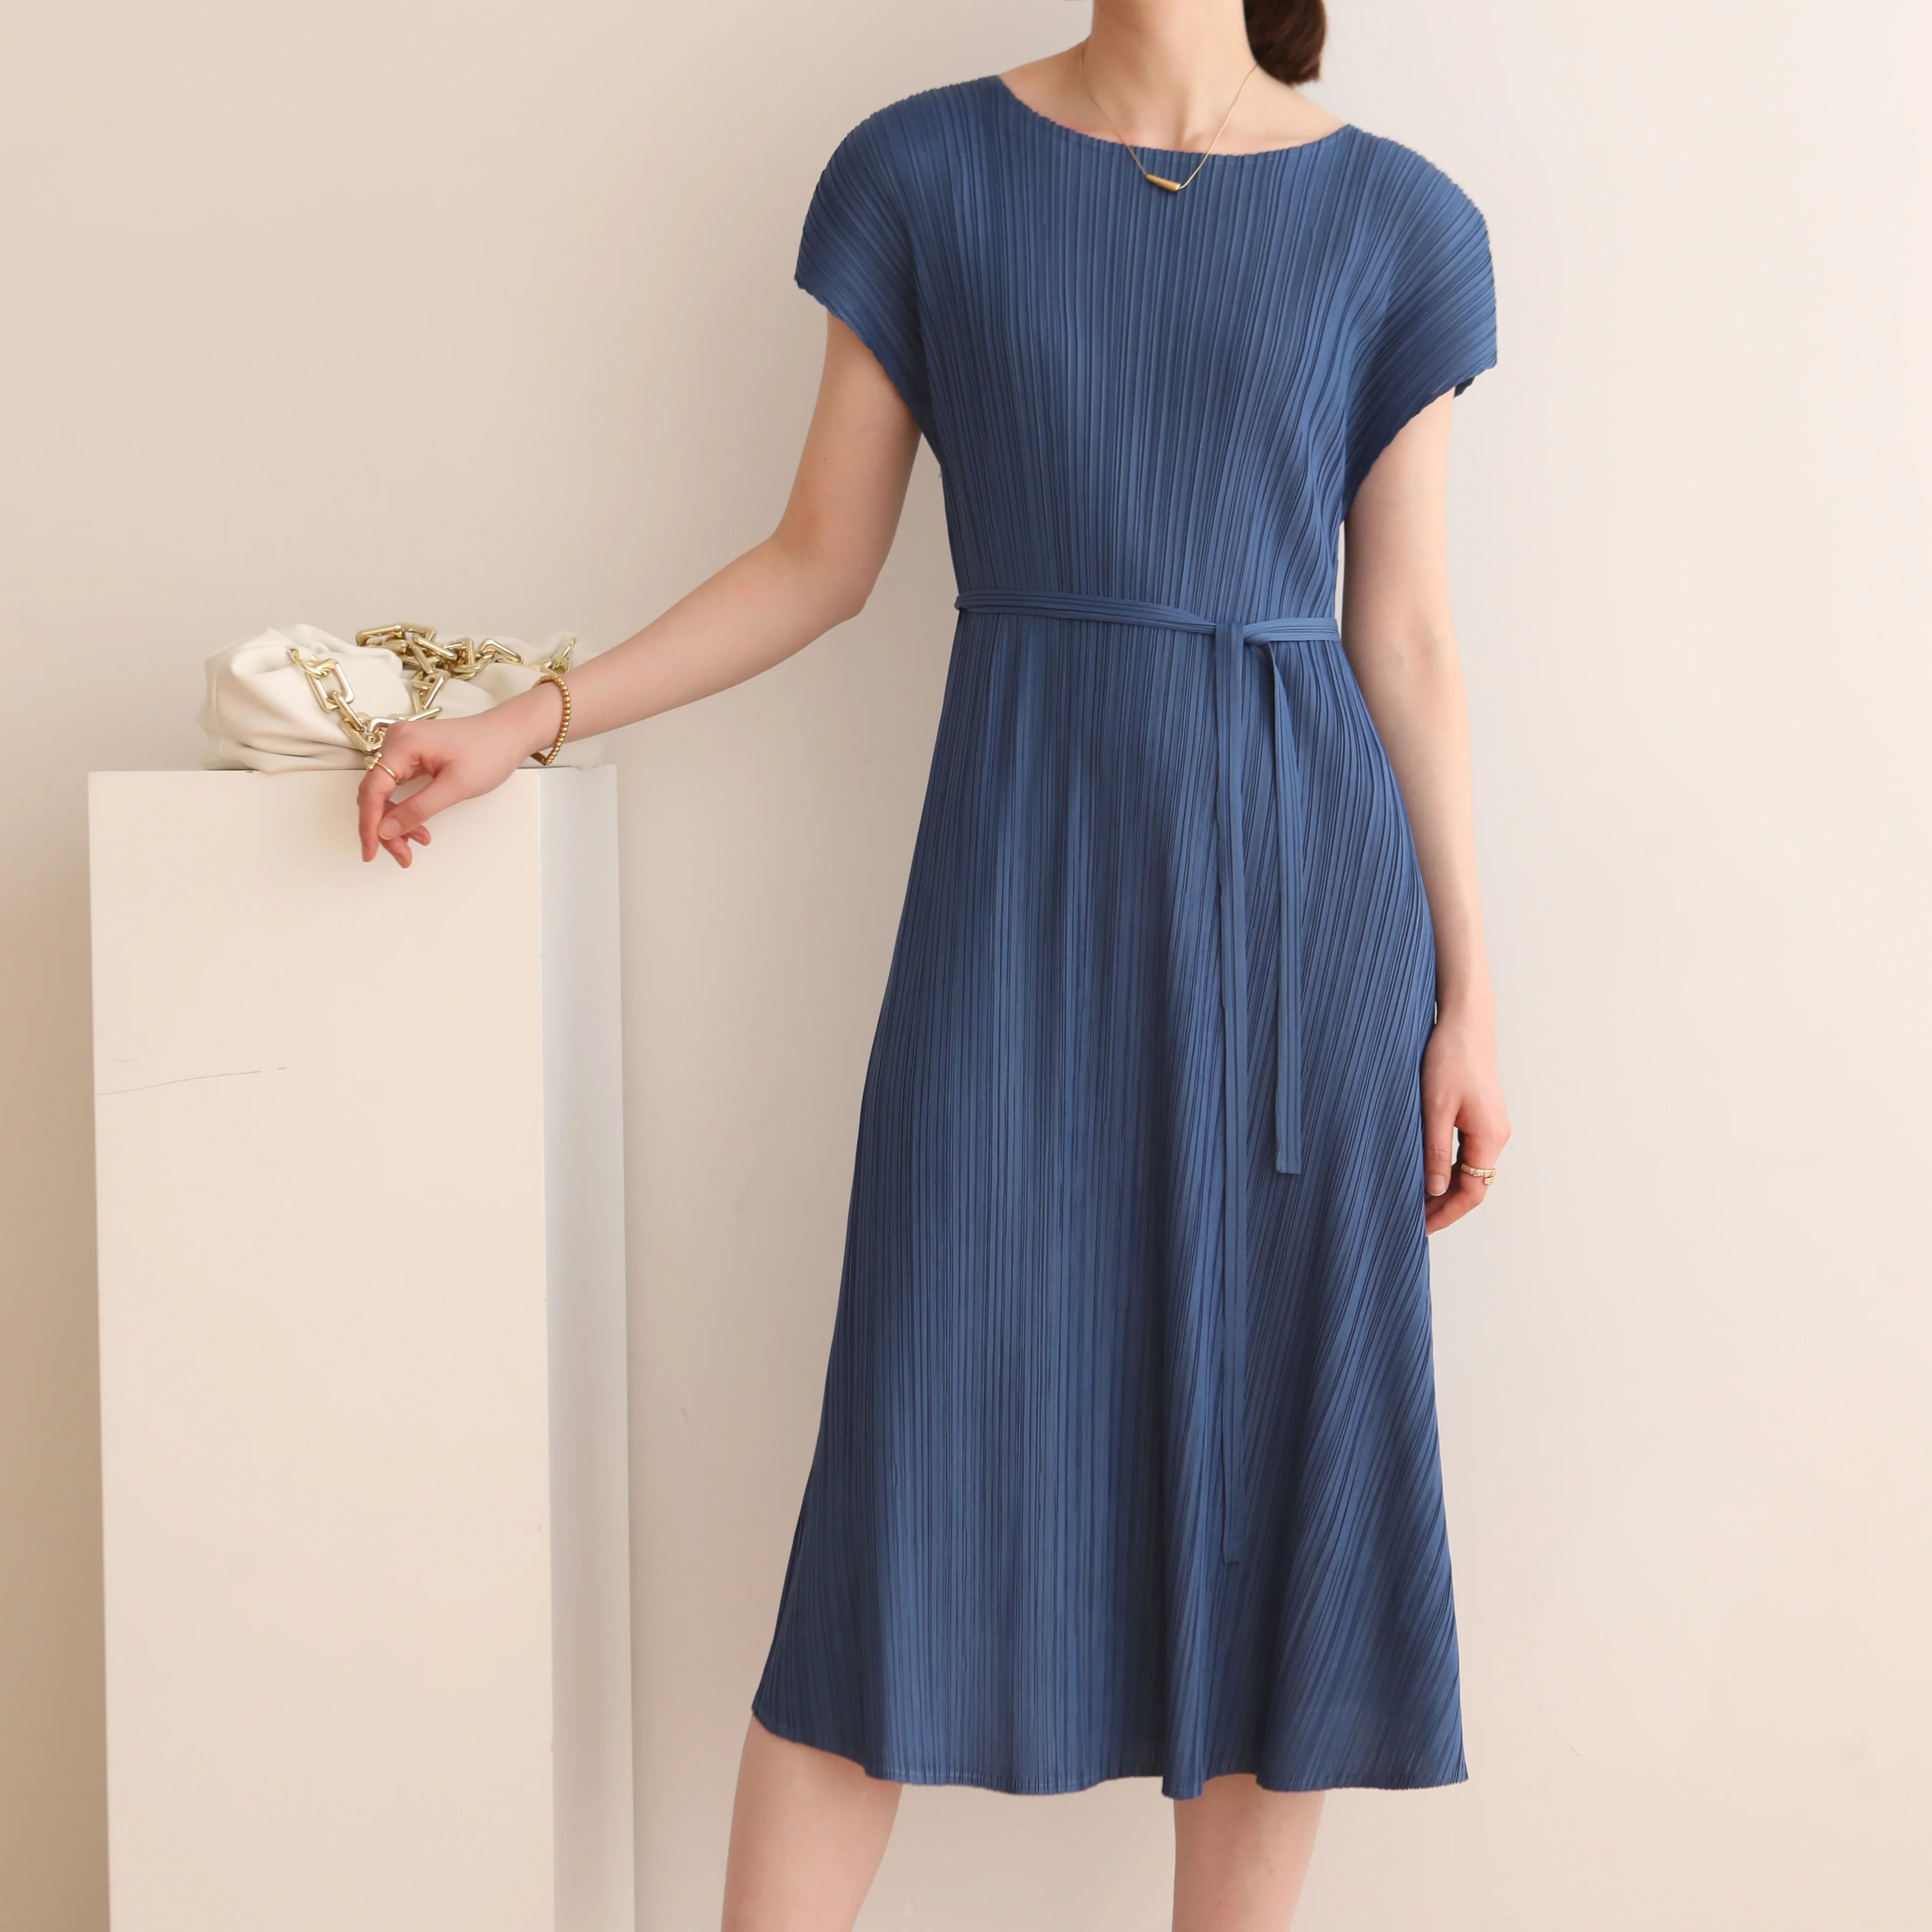 

The manufacturer directly supplies Issey Miyake's Pleats for summer with drape INS style fashion slim dress